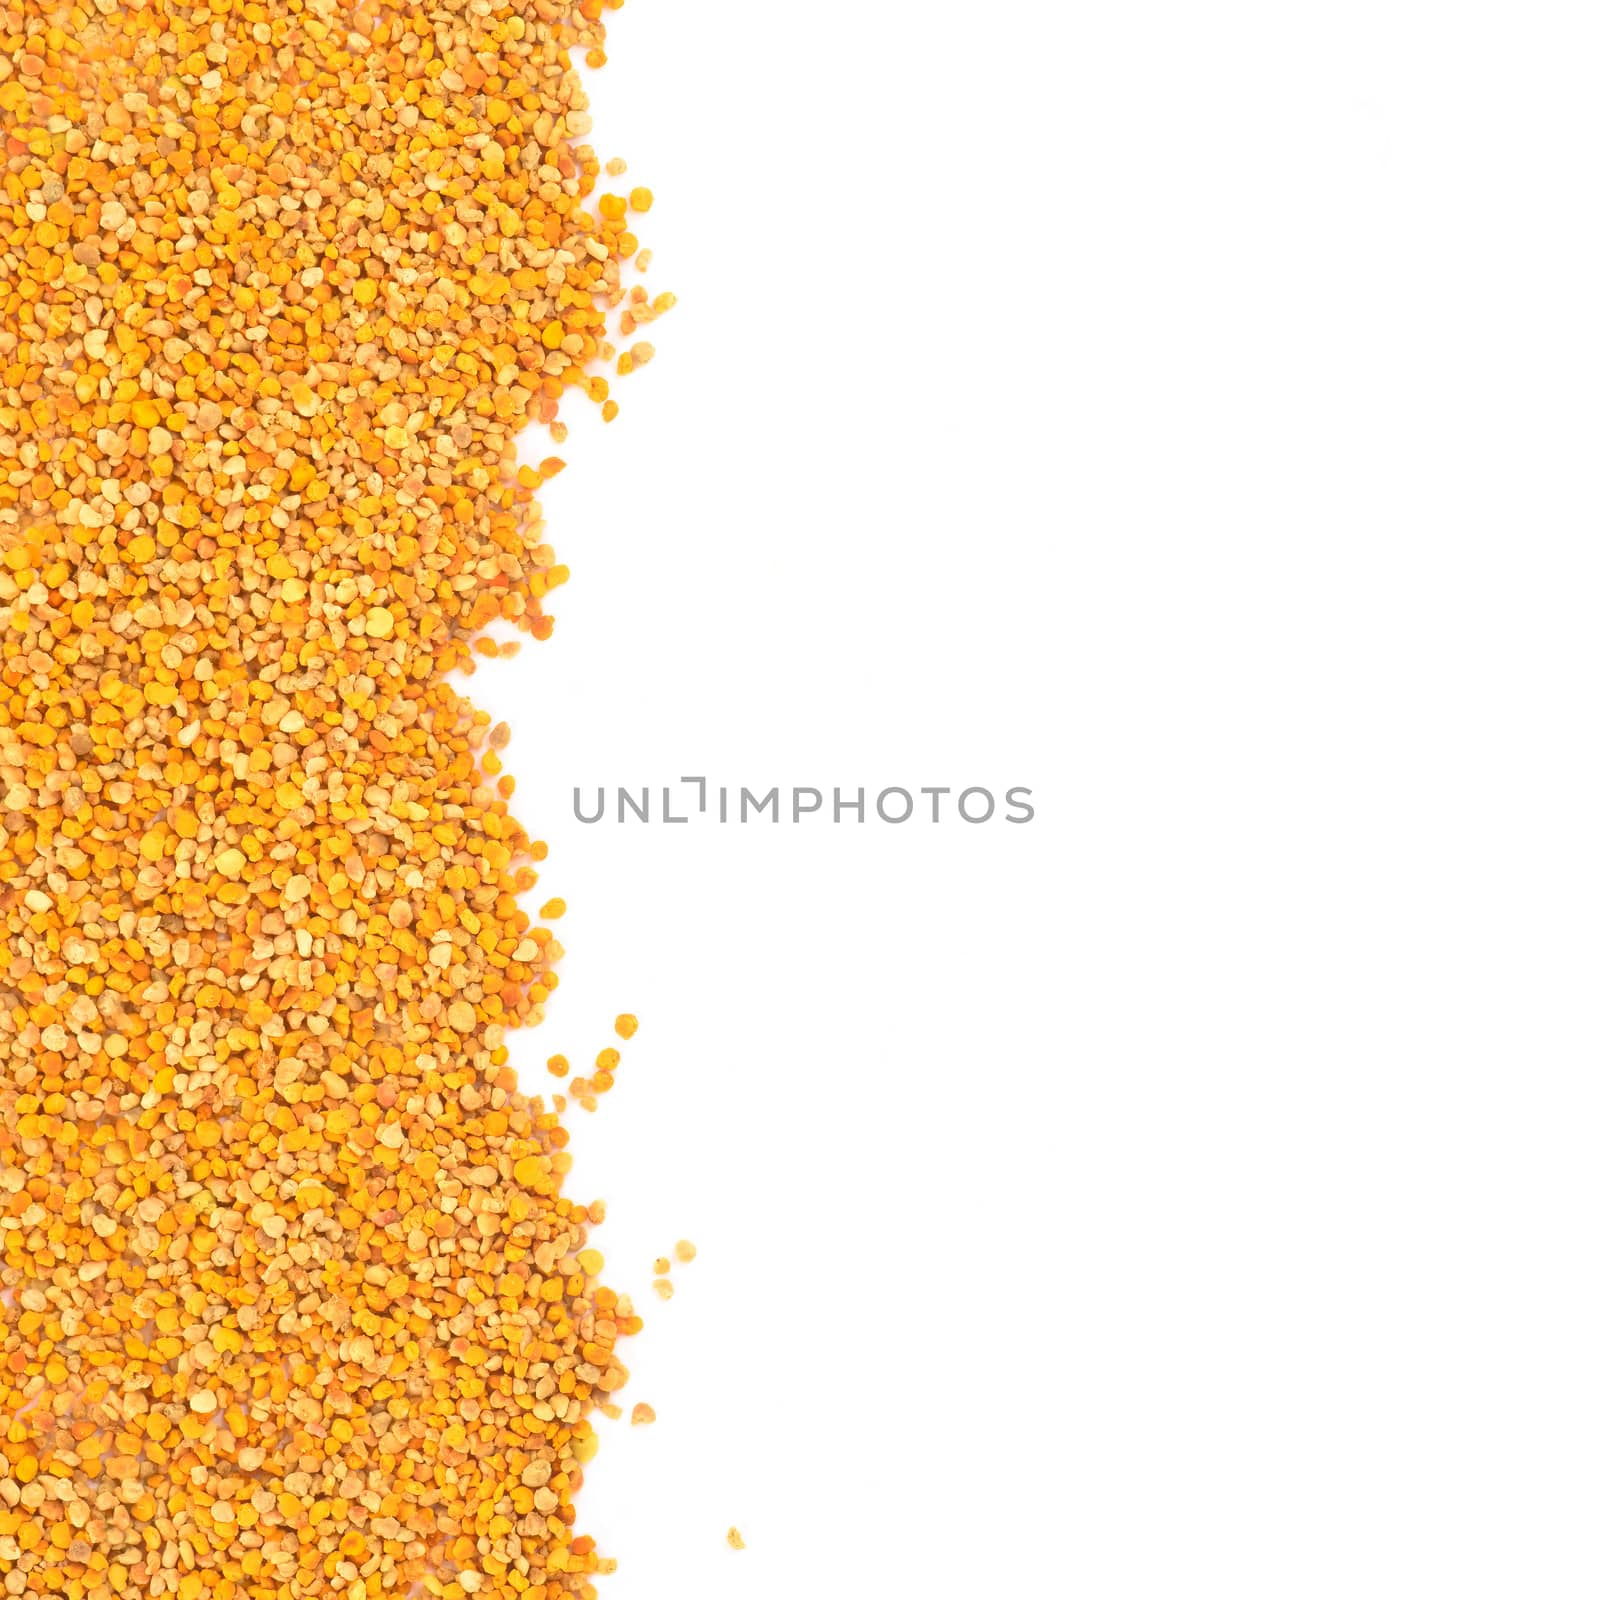 Bee pollen grains with copy space by Carche